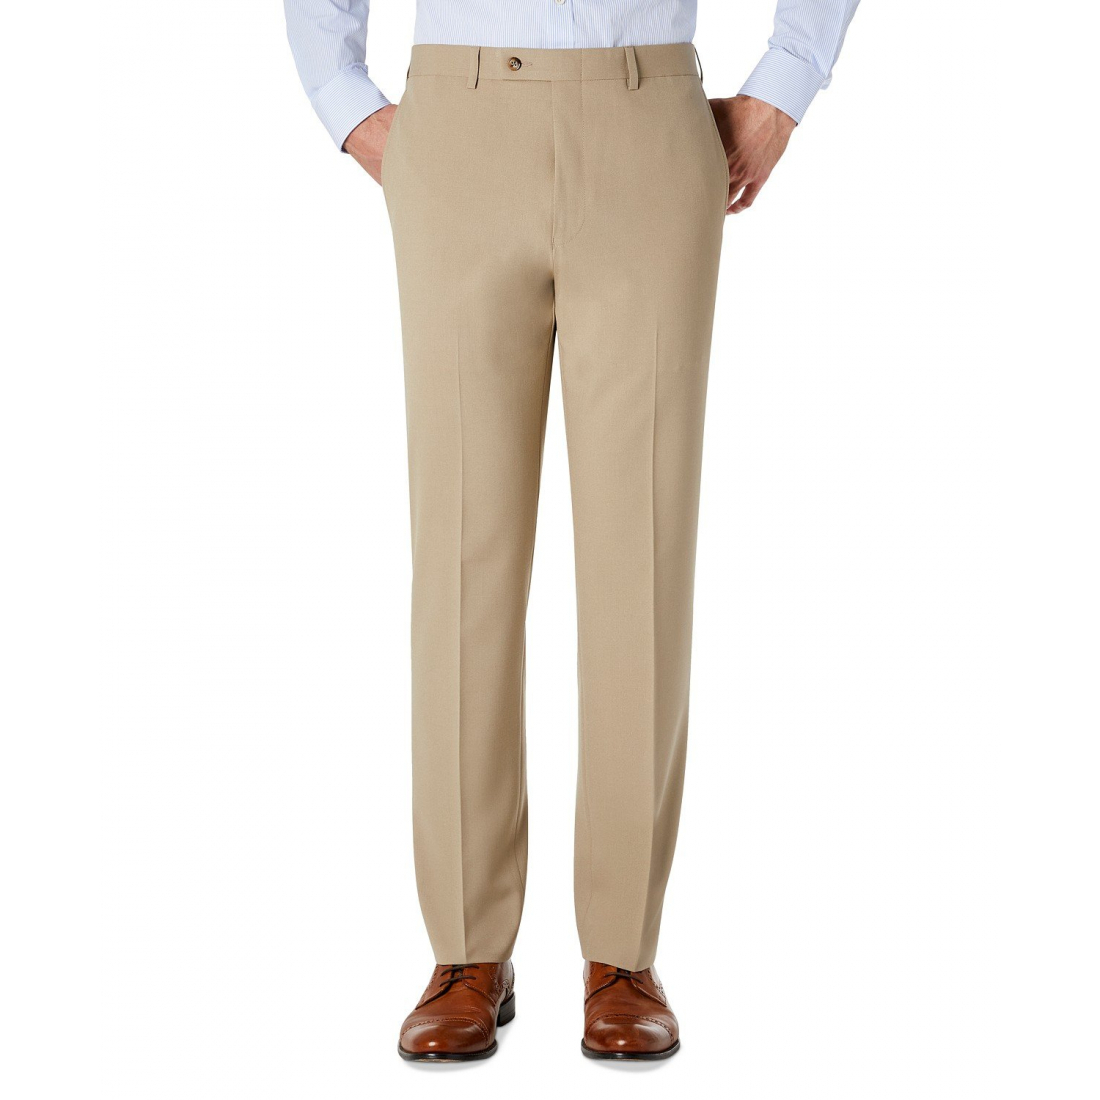 Men's 'Solid Flat-Front Dress' Trousers